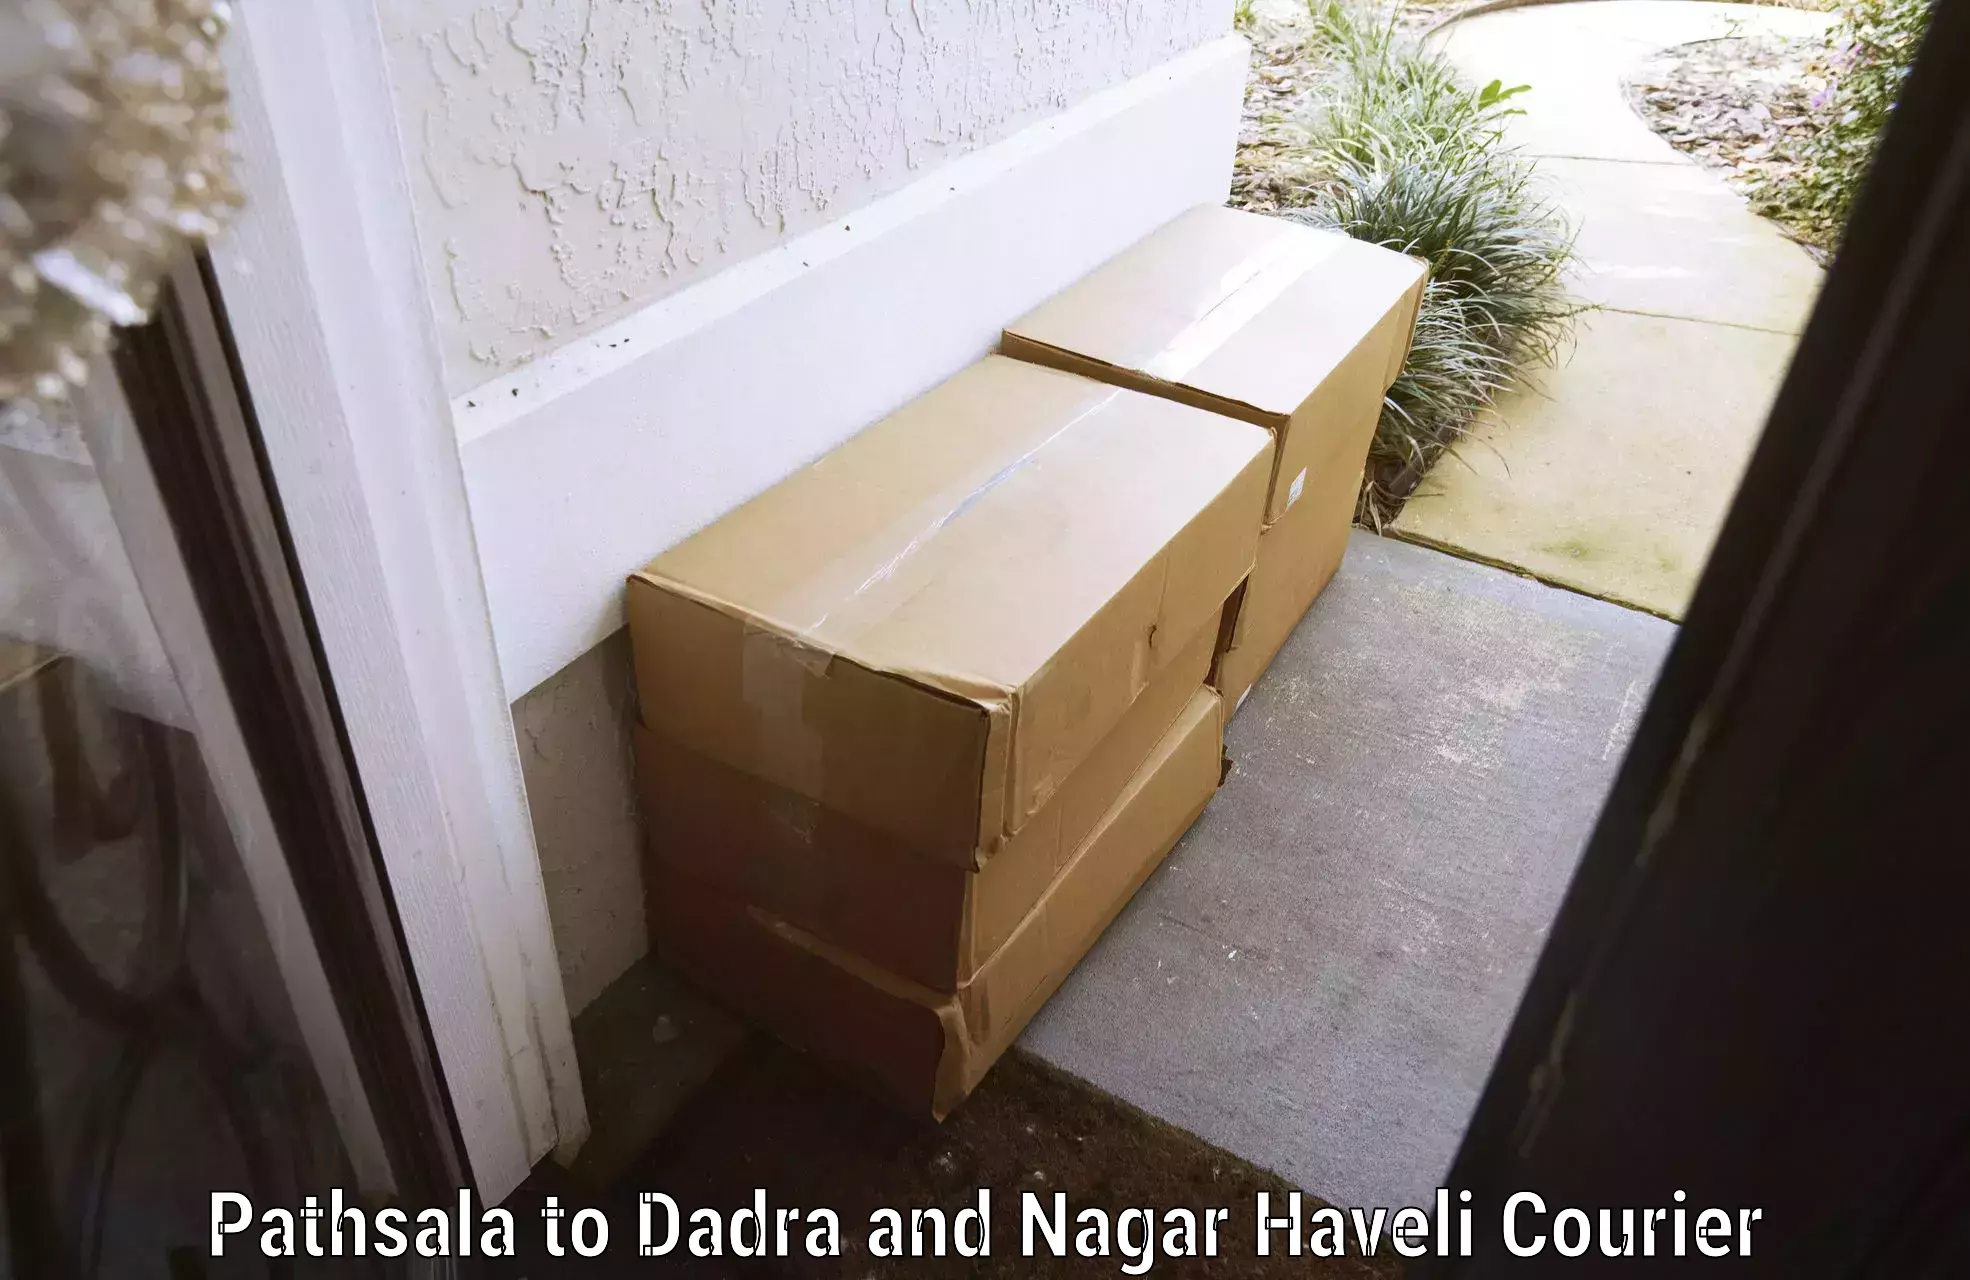 Luggage delivery system Pathsala to Dadra and Nagar Haveli